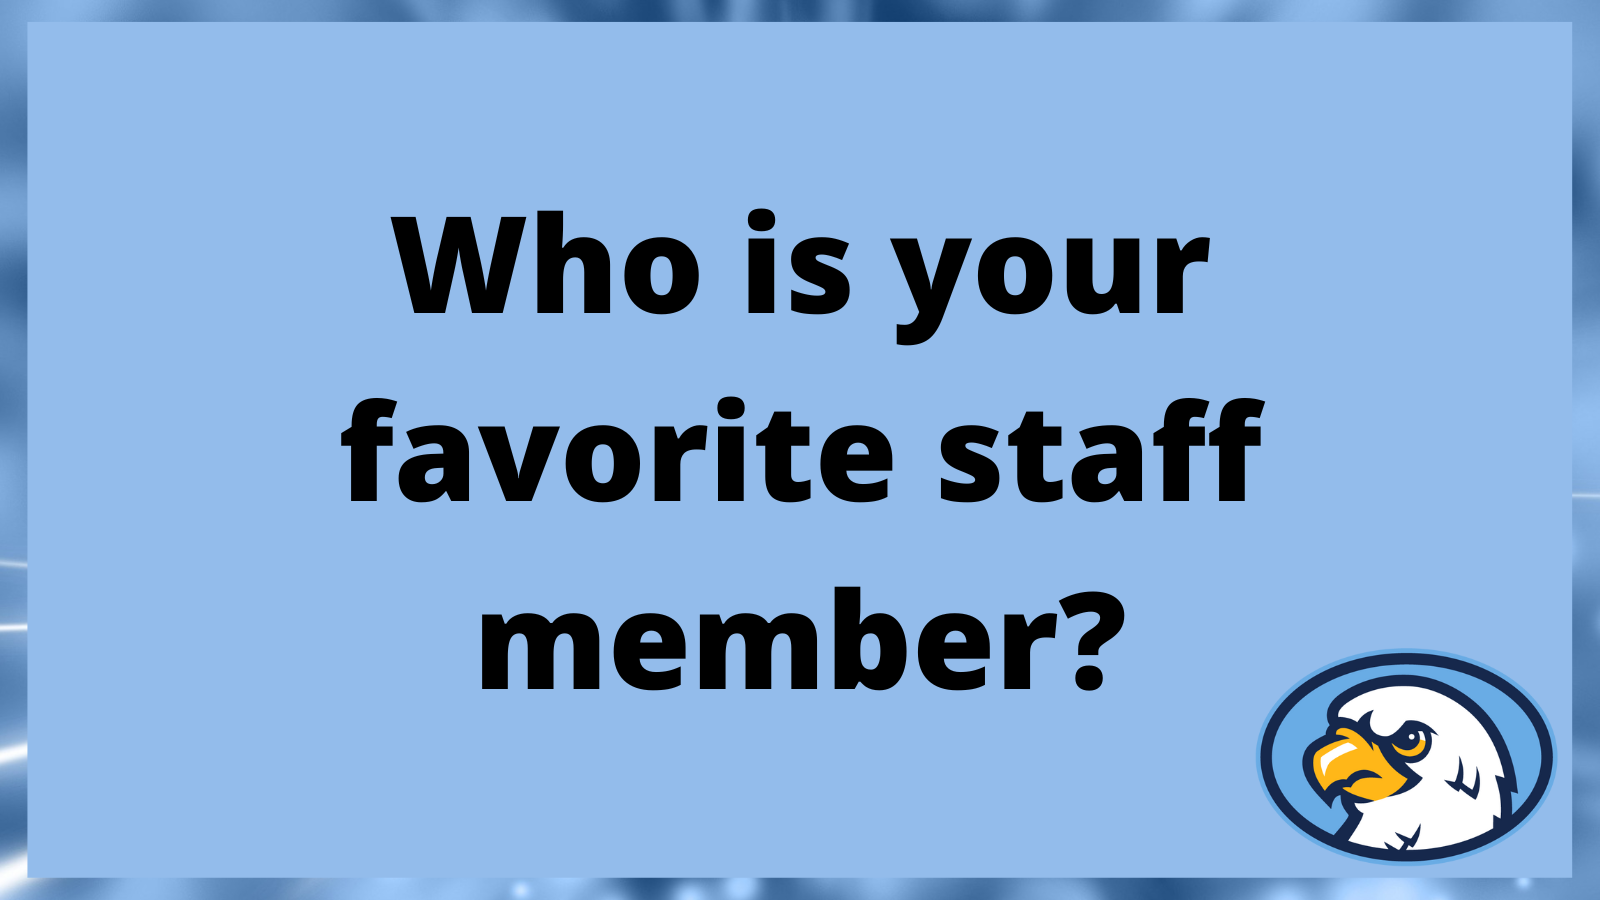 Who is your favorite staff member?